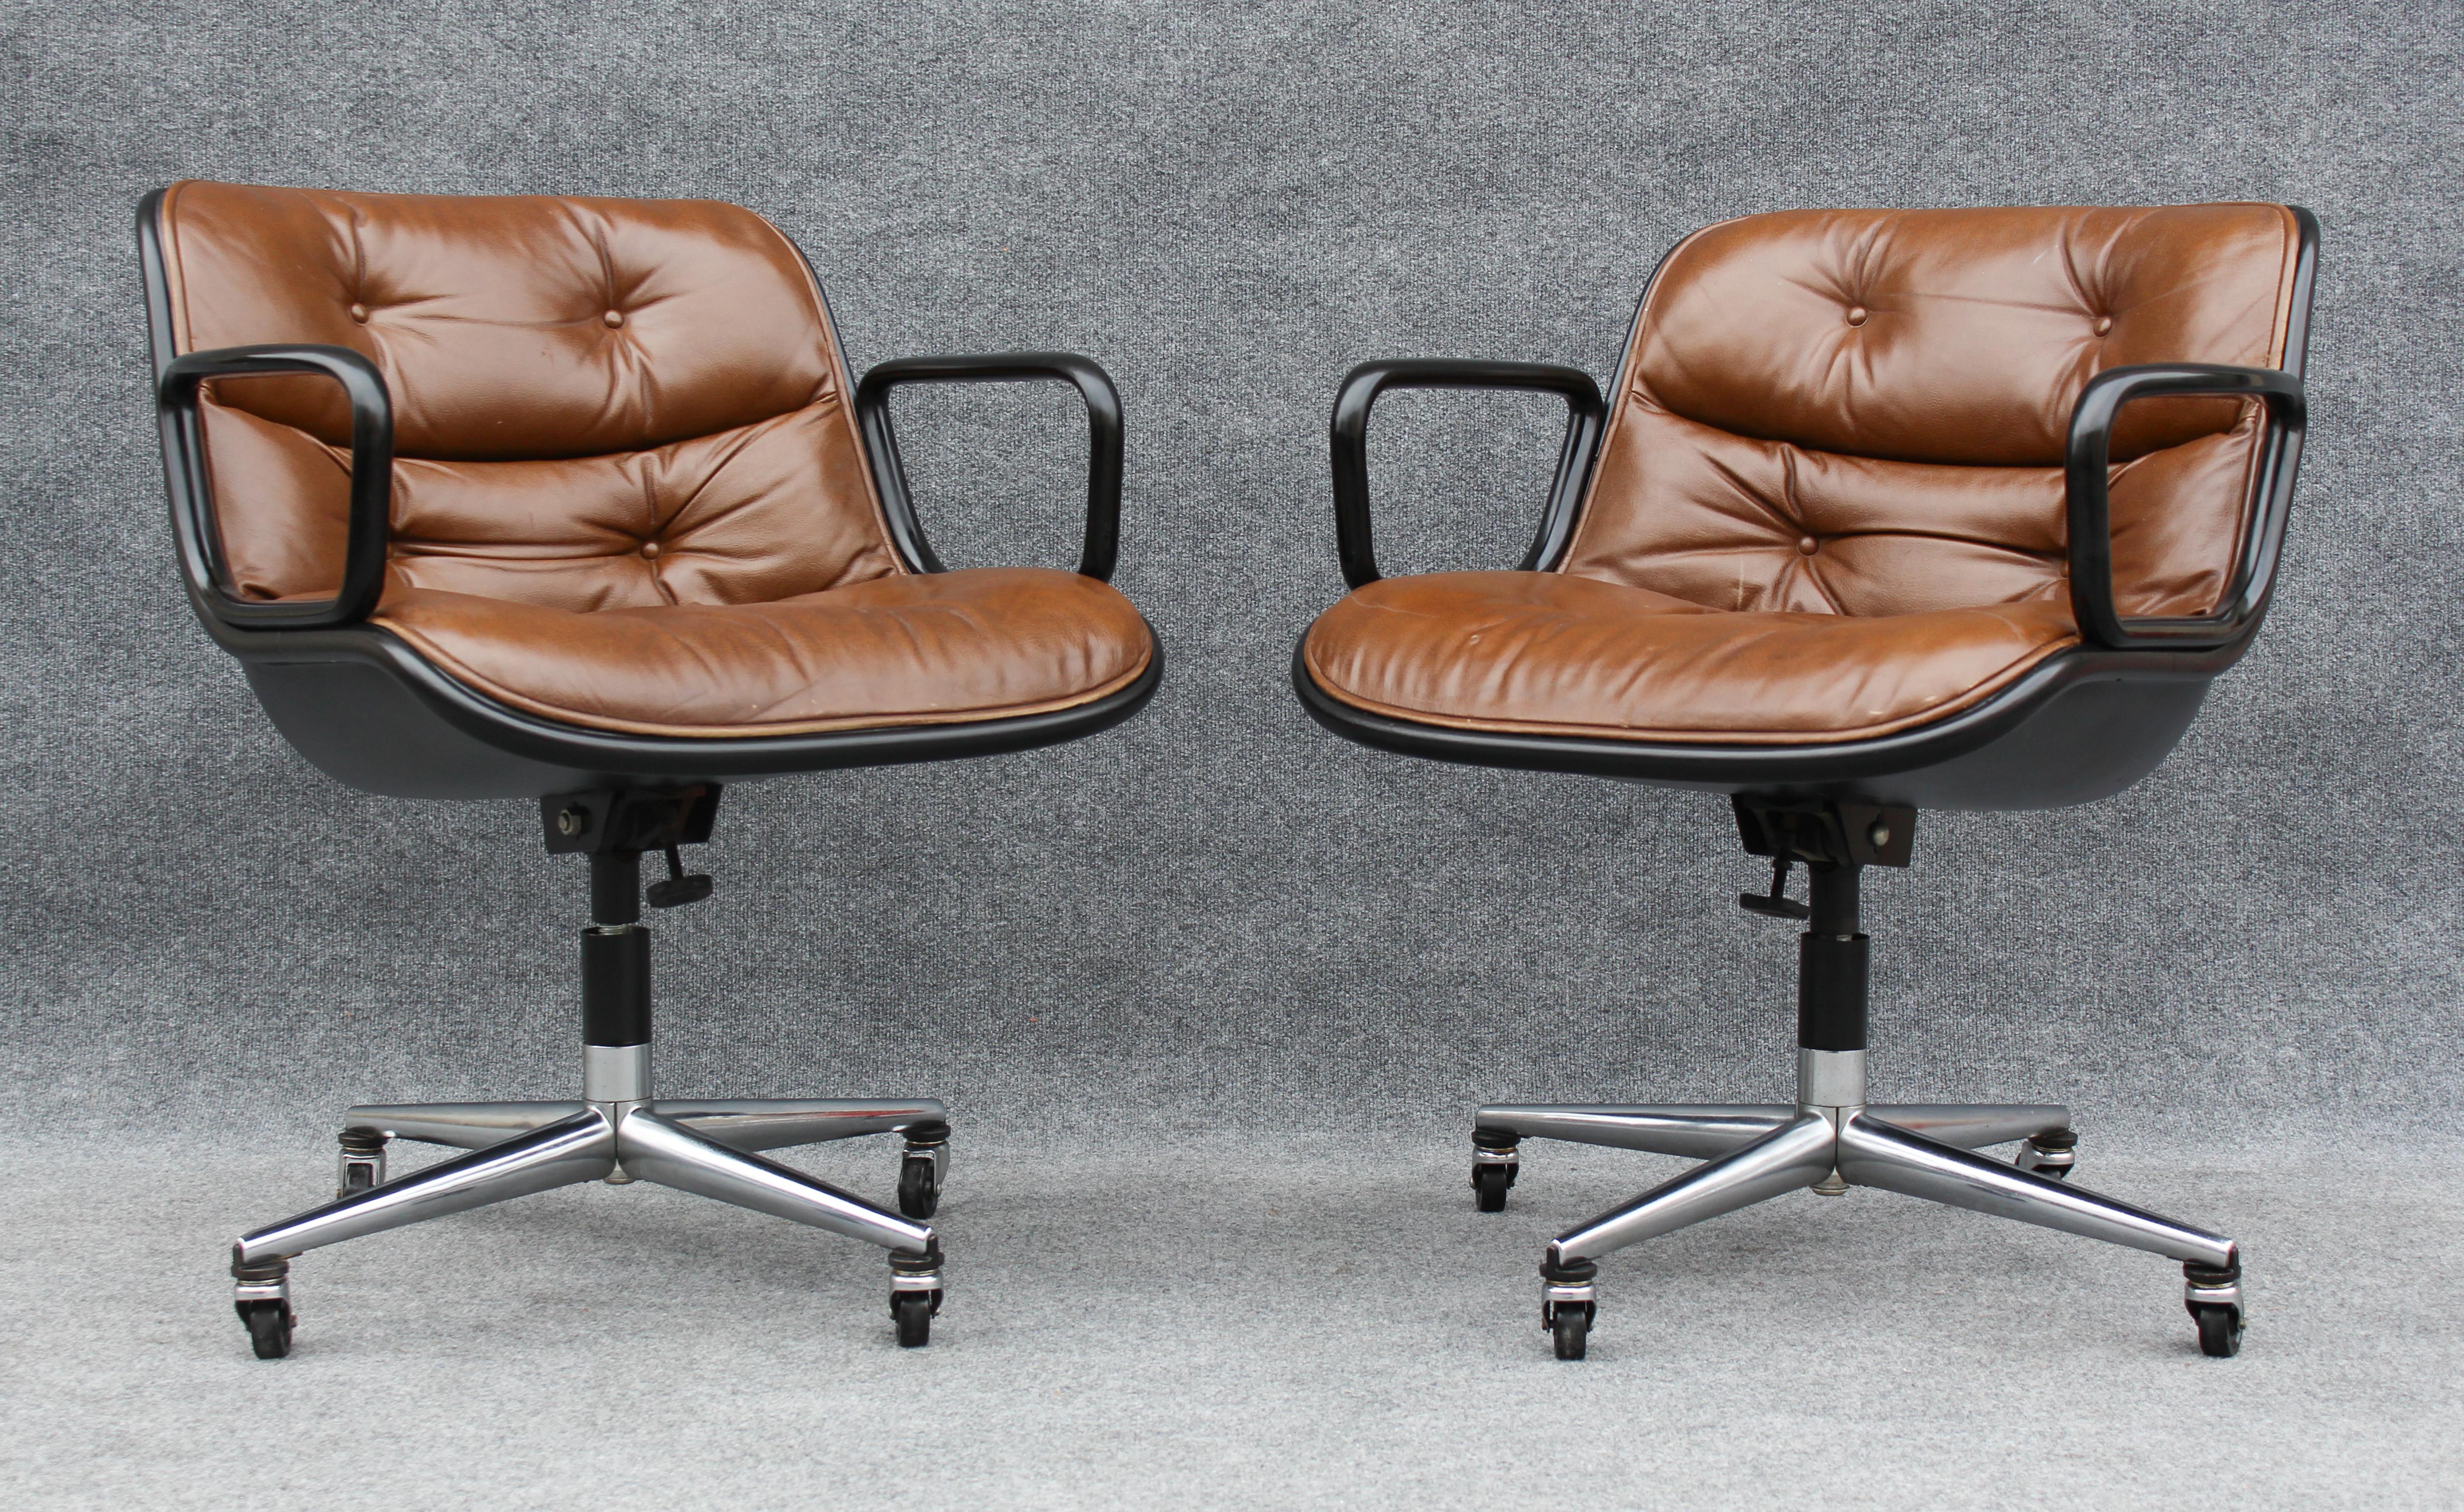 American Pair of Charles Pollock for Knoll Arm or Desk Chairs in Brown Leather & Black